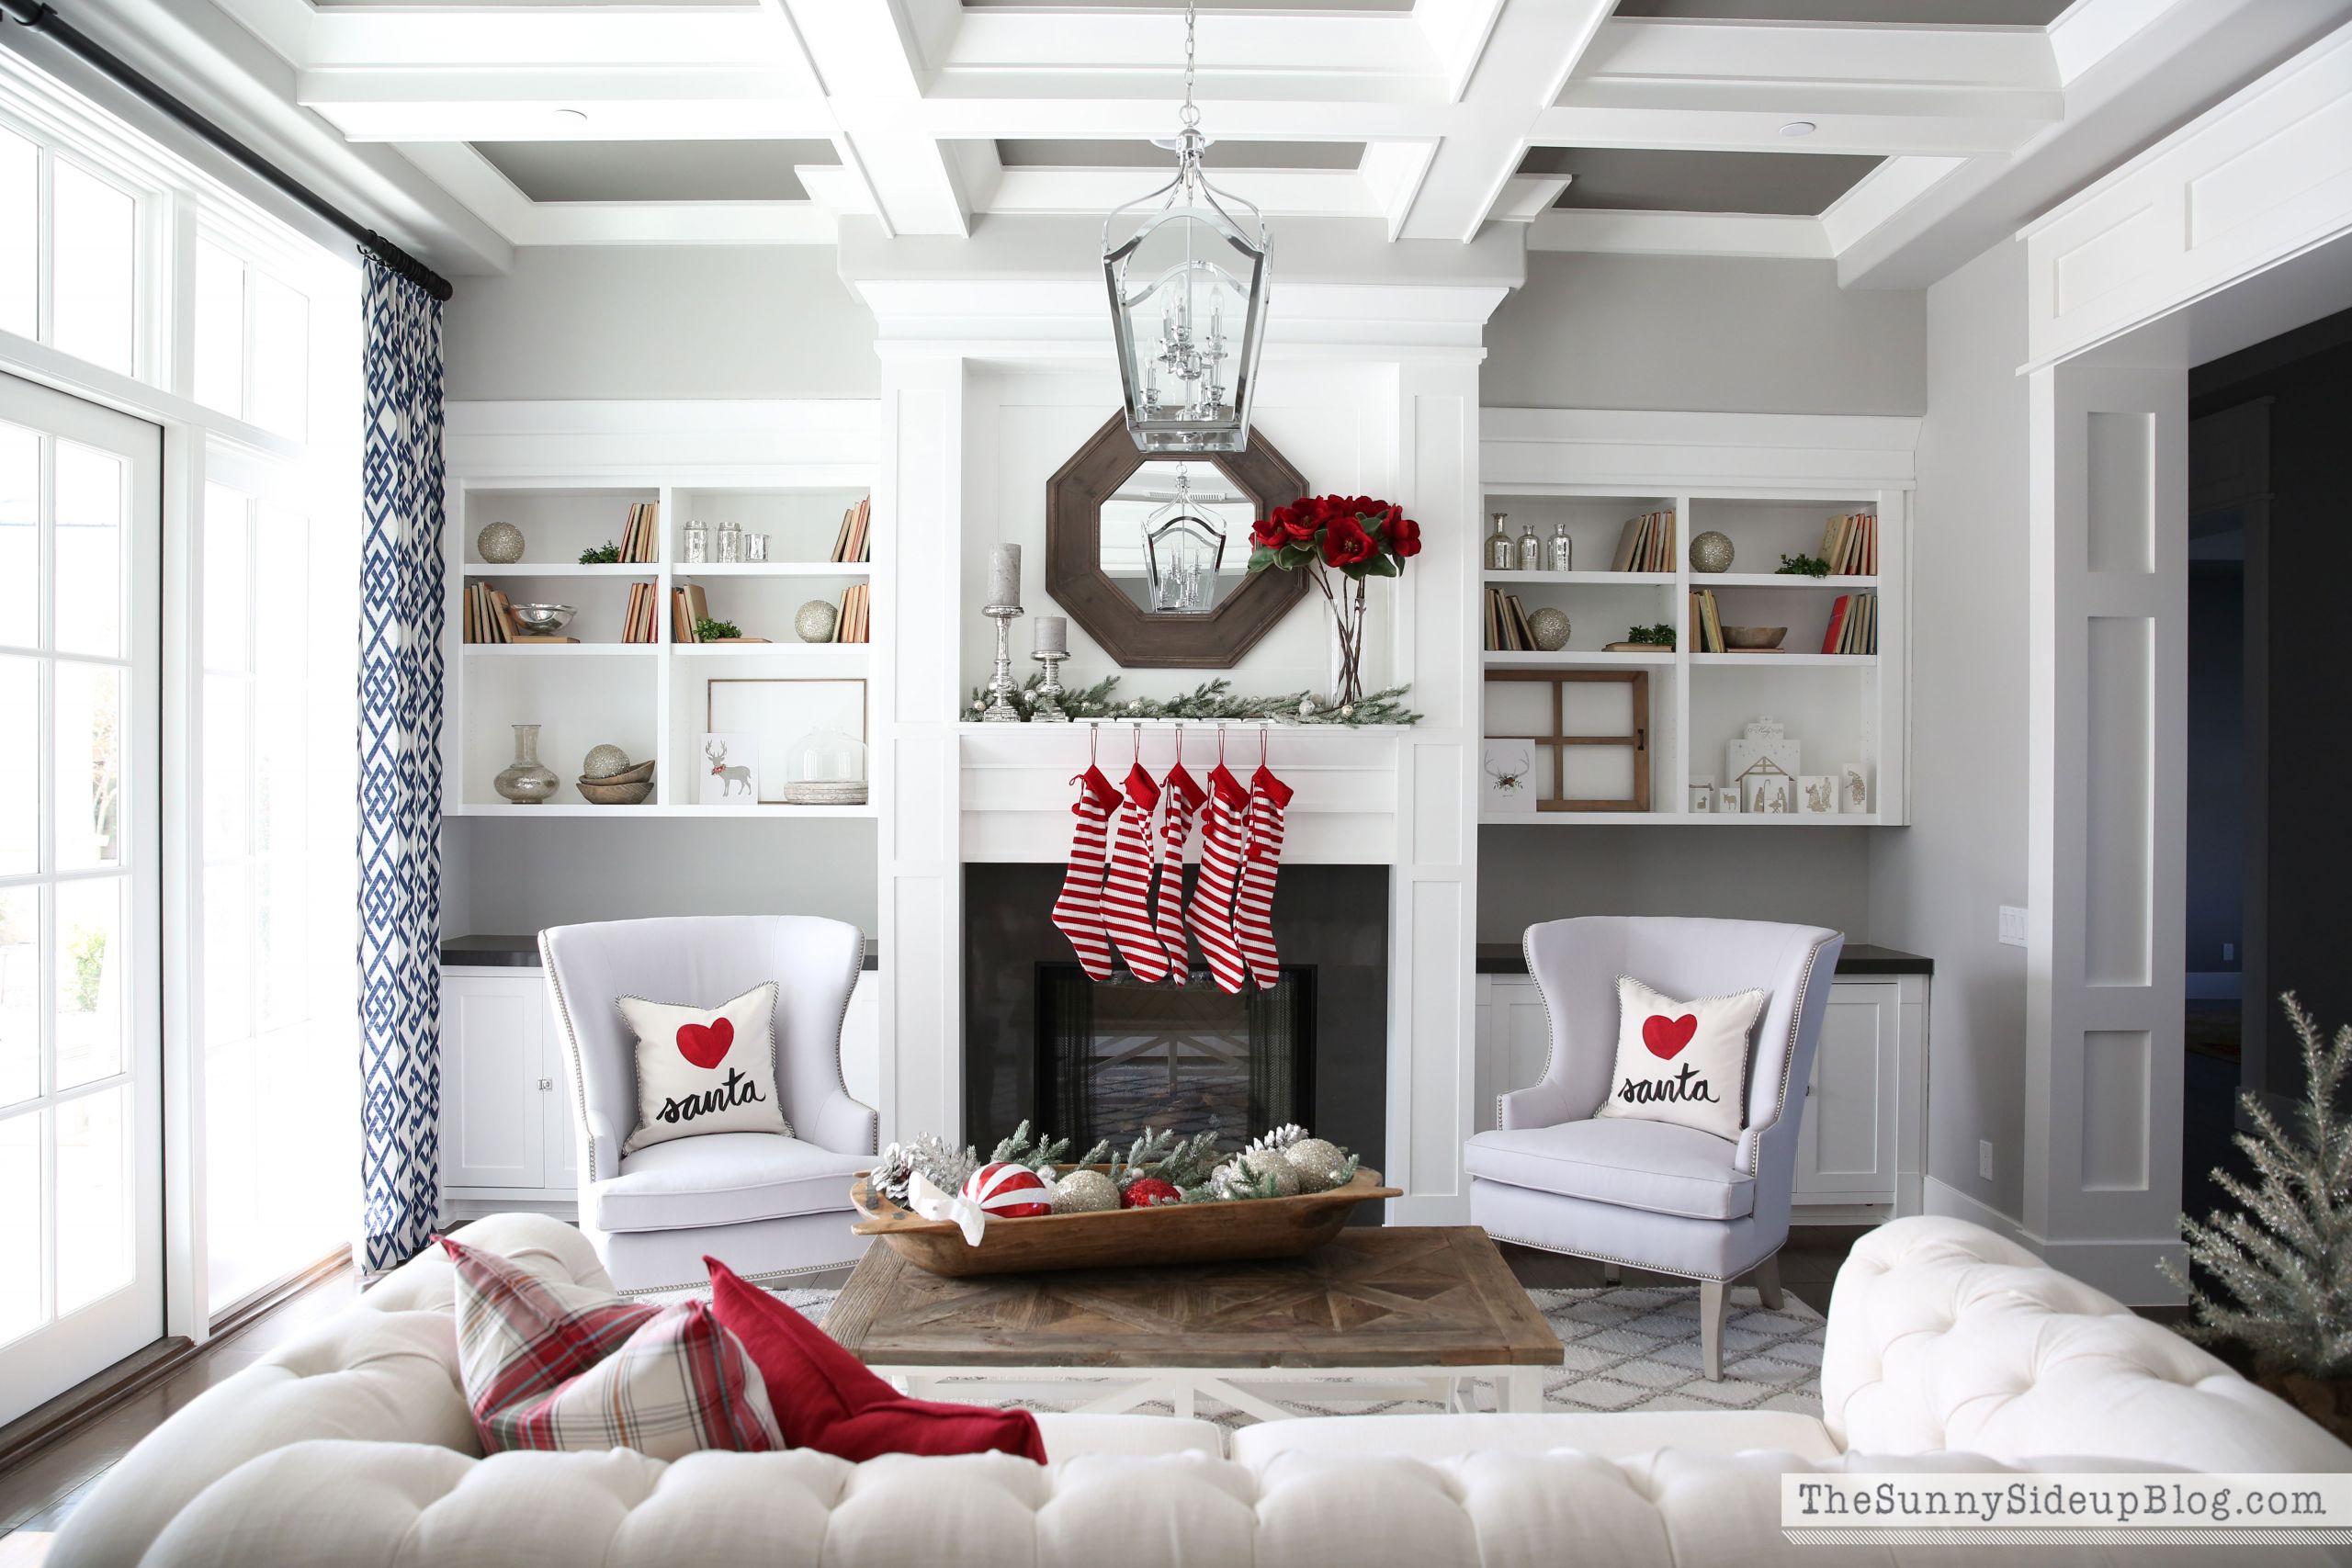 Formal Living Room Decor
 Christmas in the formal living room The Sunny Side Up Blog